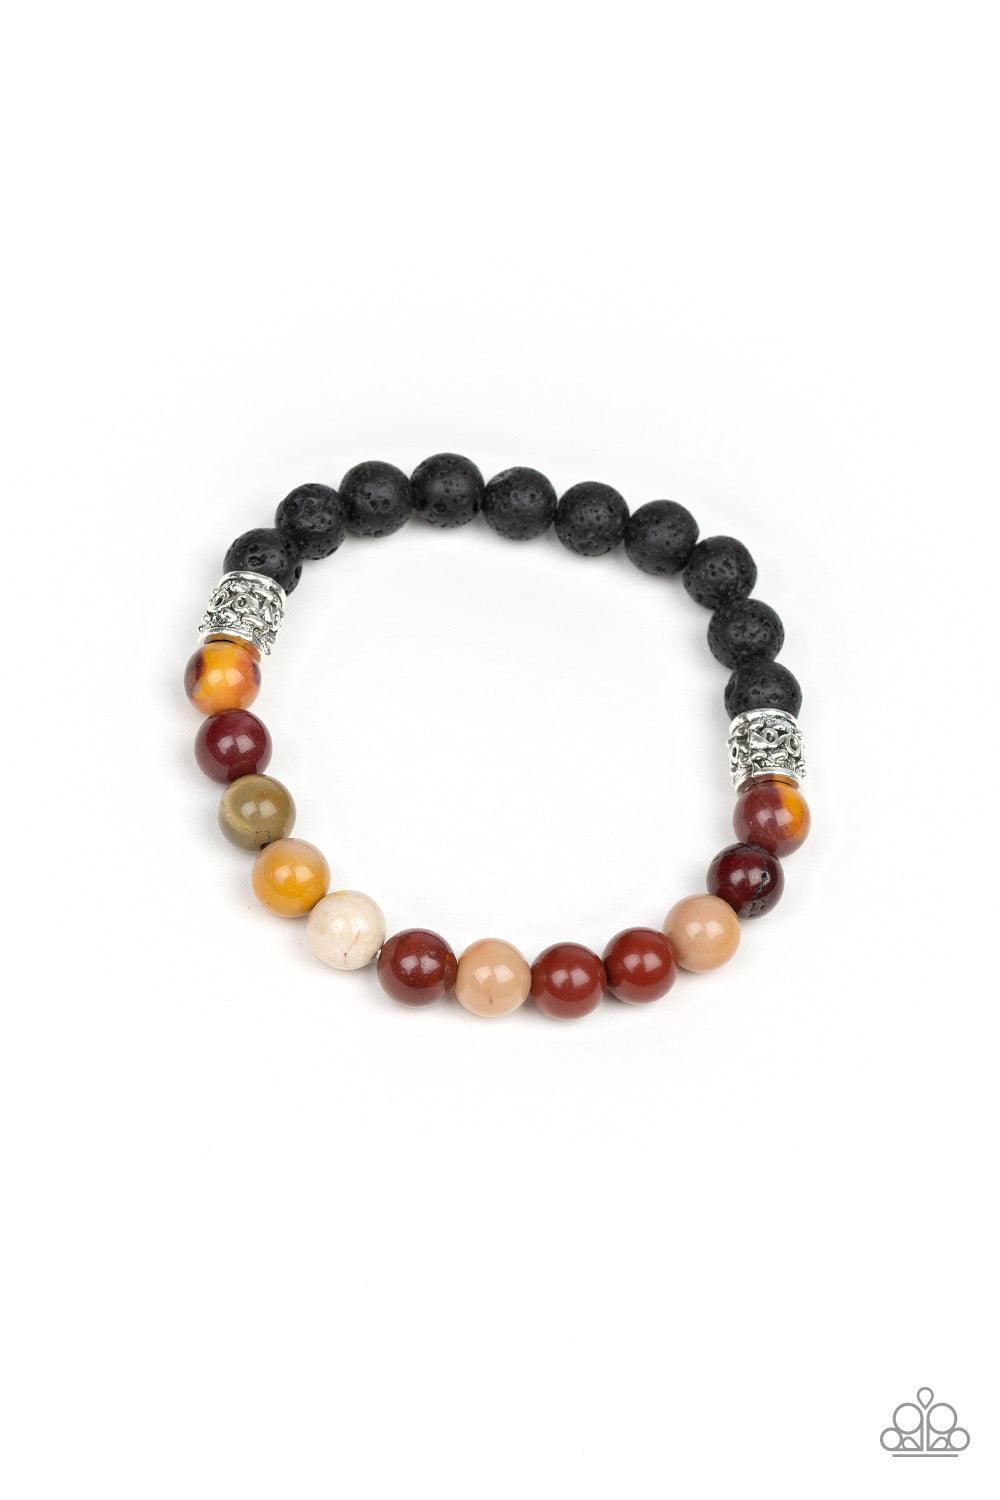 Paparazzi Accessories Take it Easy - Yellow Infused with dainty silver accents, a collection of black lava rock beads and refreshing stone beads are threaded along a stretchy band around the wrist for a seasonal style. Jewelry